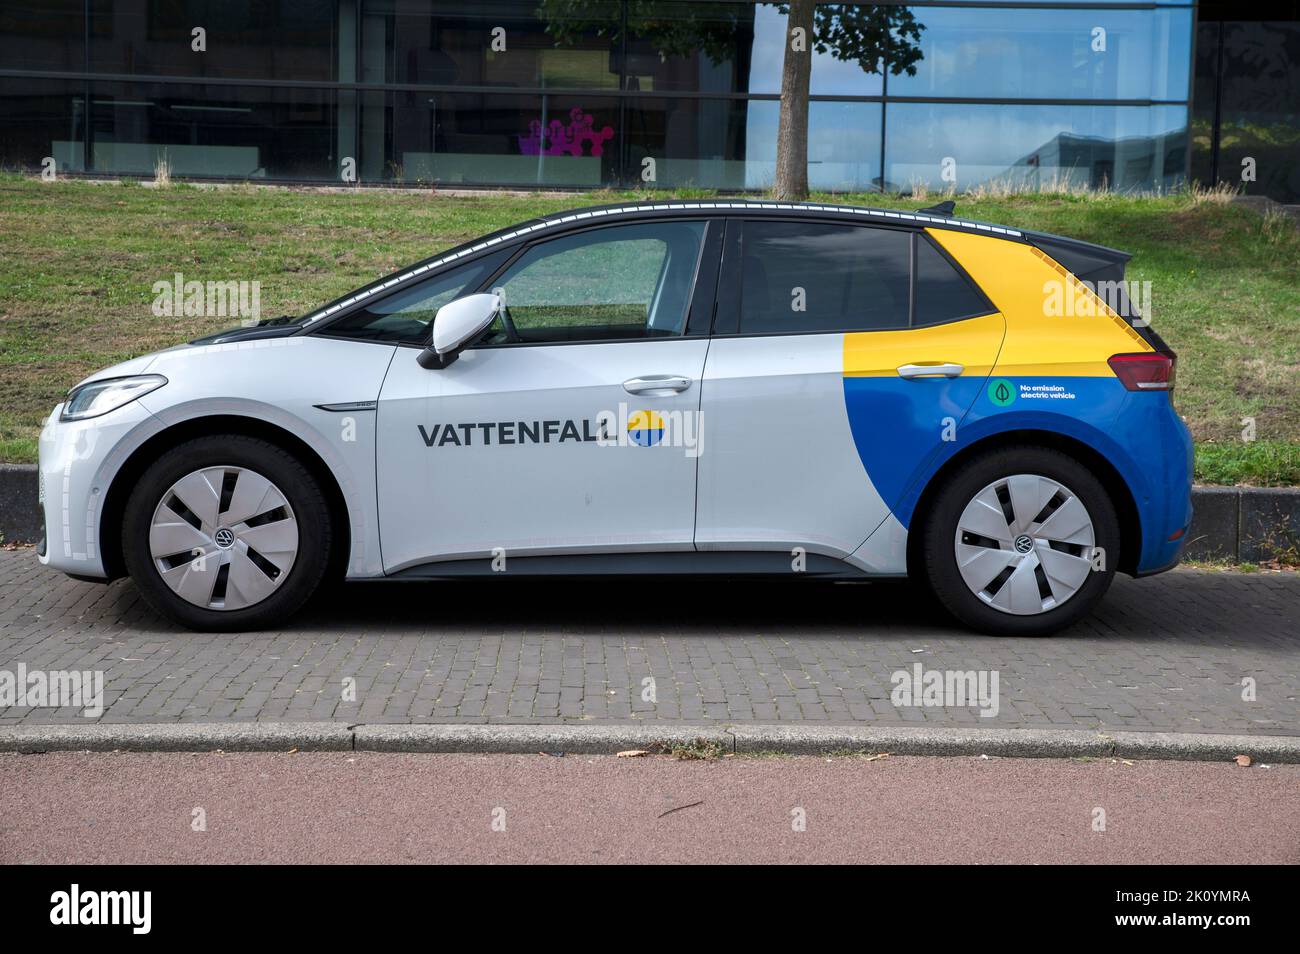 Vattenfall Company Car At Amsterdam The Netherlands 13-9-2022 Stock Photo